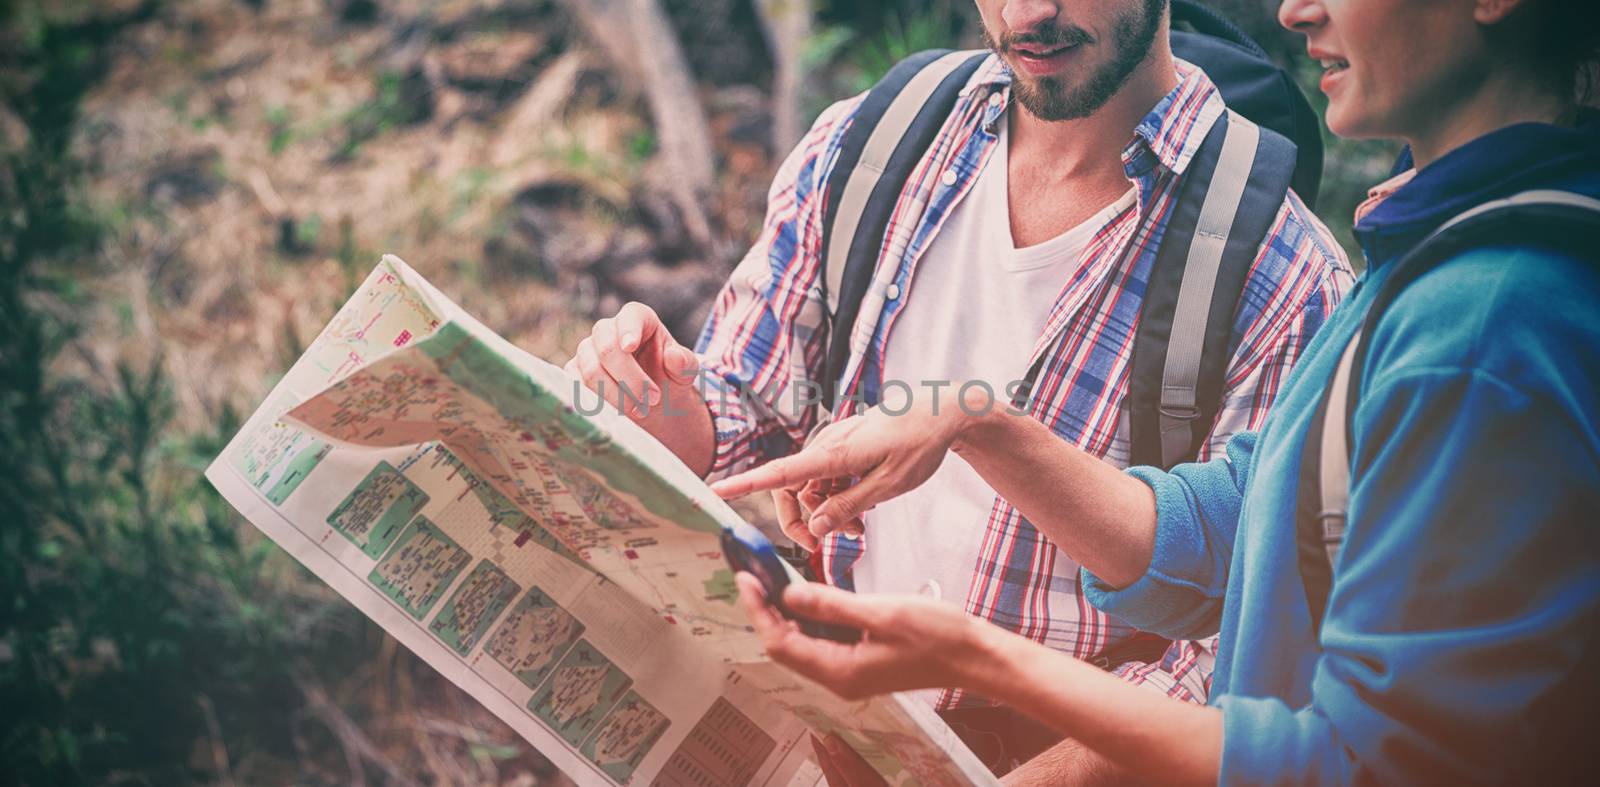 Couple discussing over map in forest by Wavebreakmedia